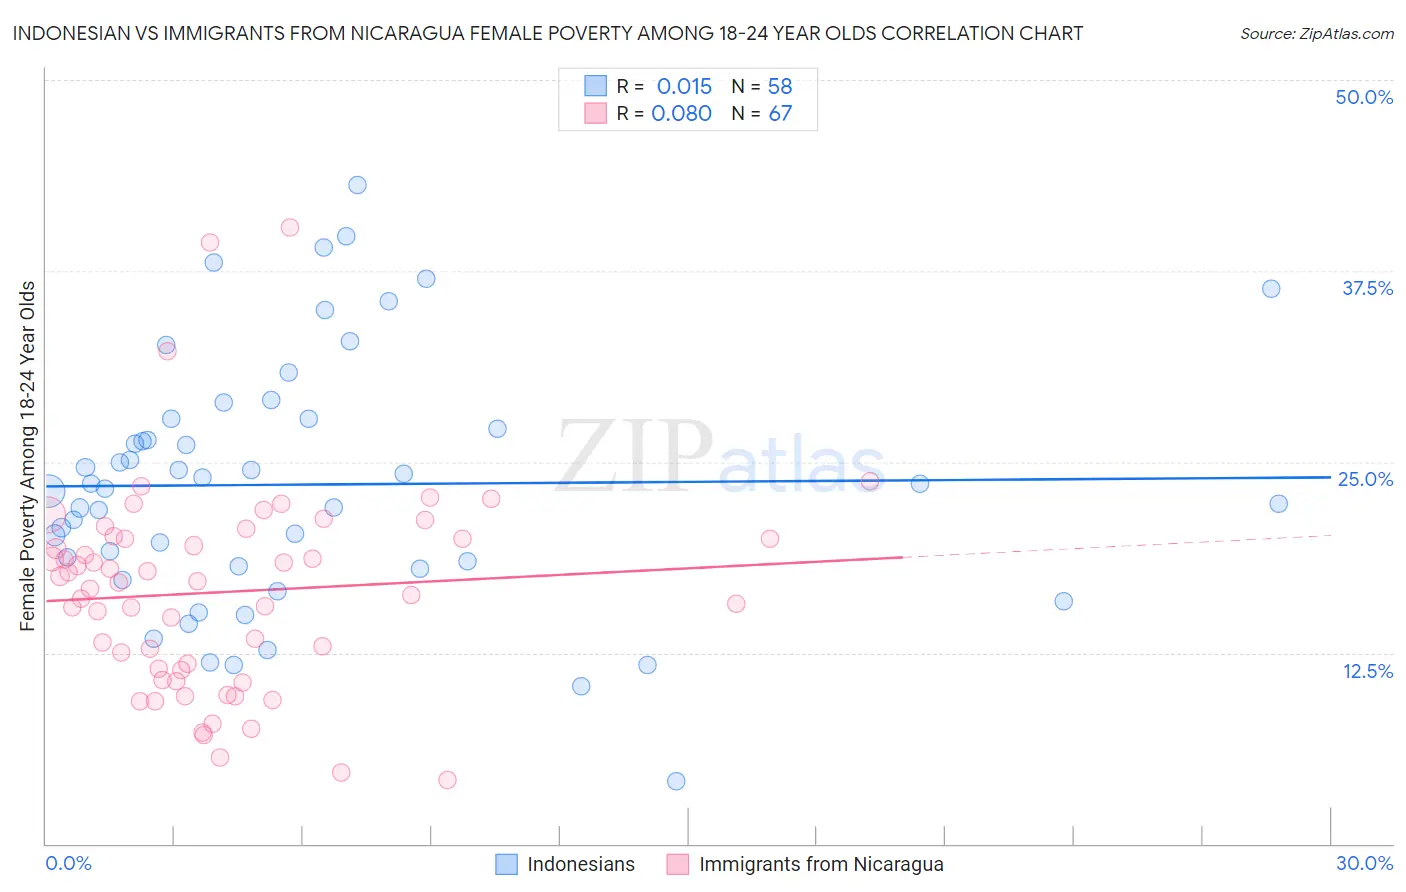 Indonesian vs Immigrants from Nicaragua Female Poverty Among 18-24 Year Olds